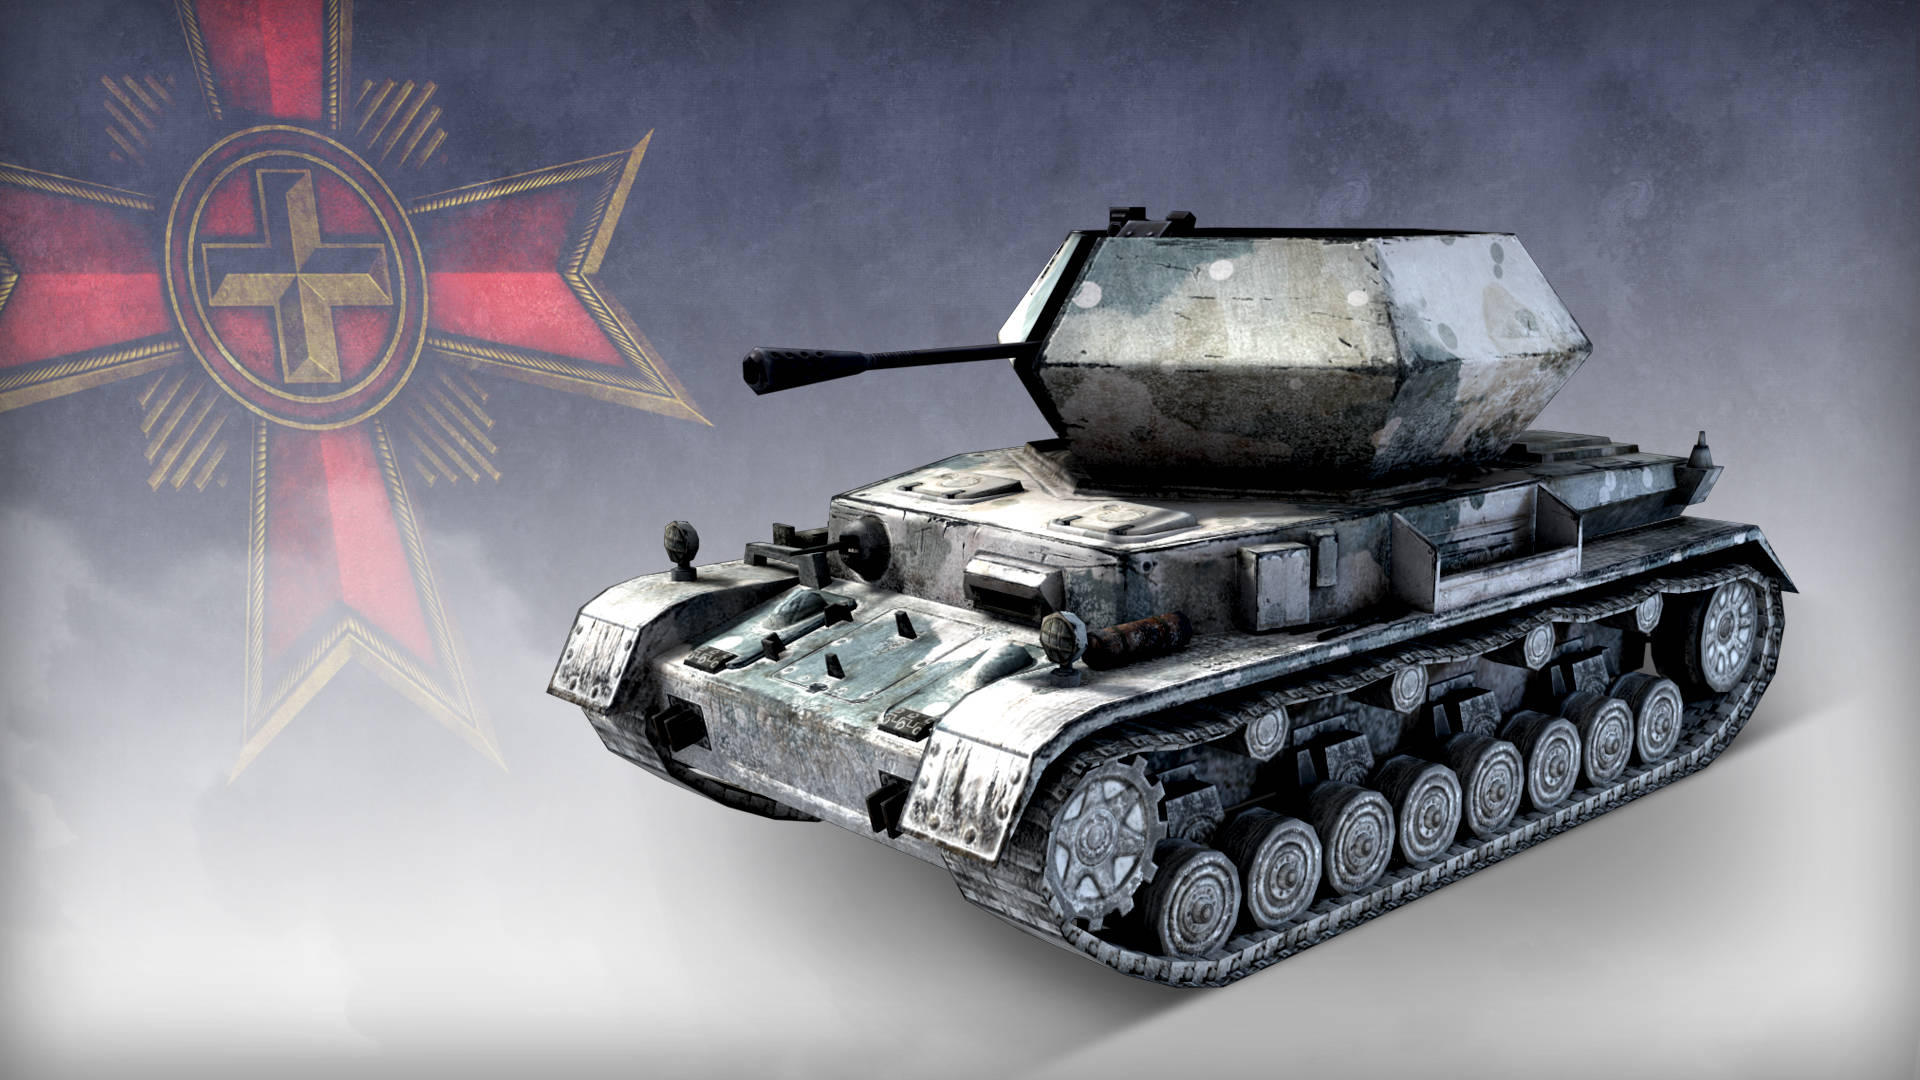 Company of Heroes 2 Panzer IV Tank Wallpaper